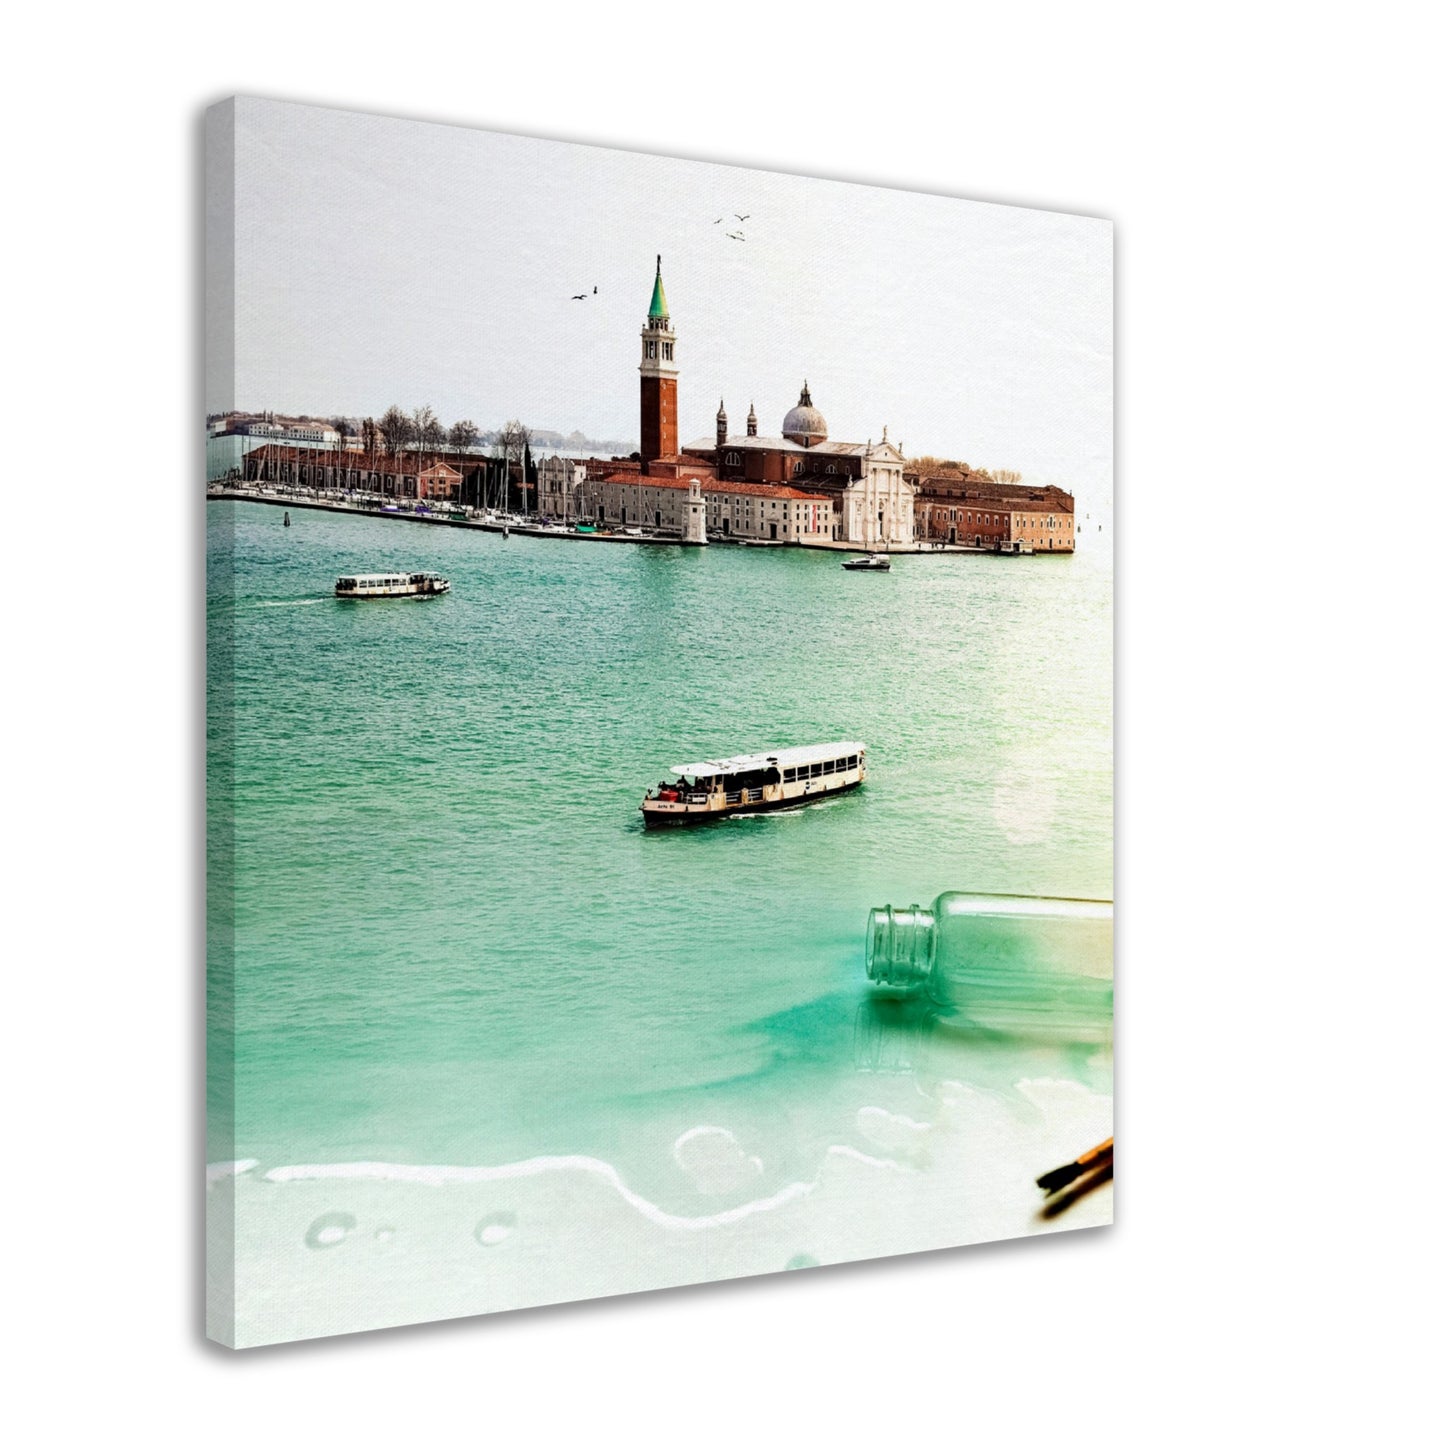 Venice In A Bottle - Canvas Print